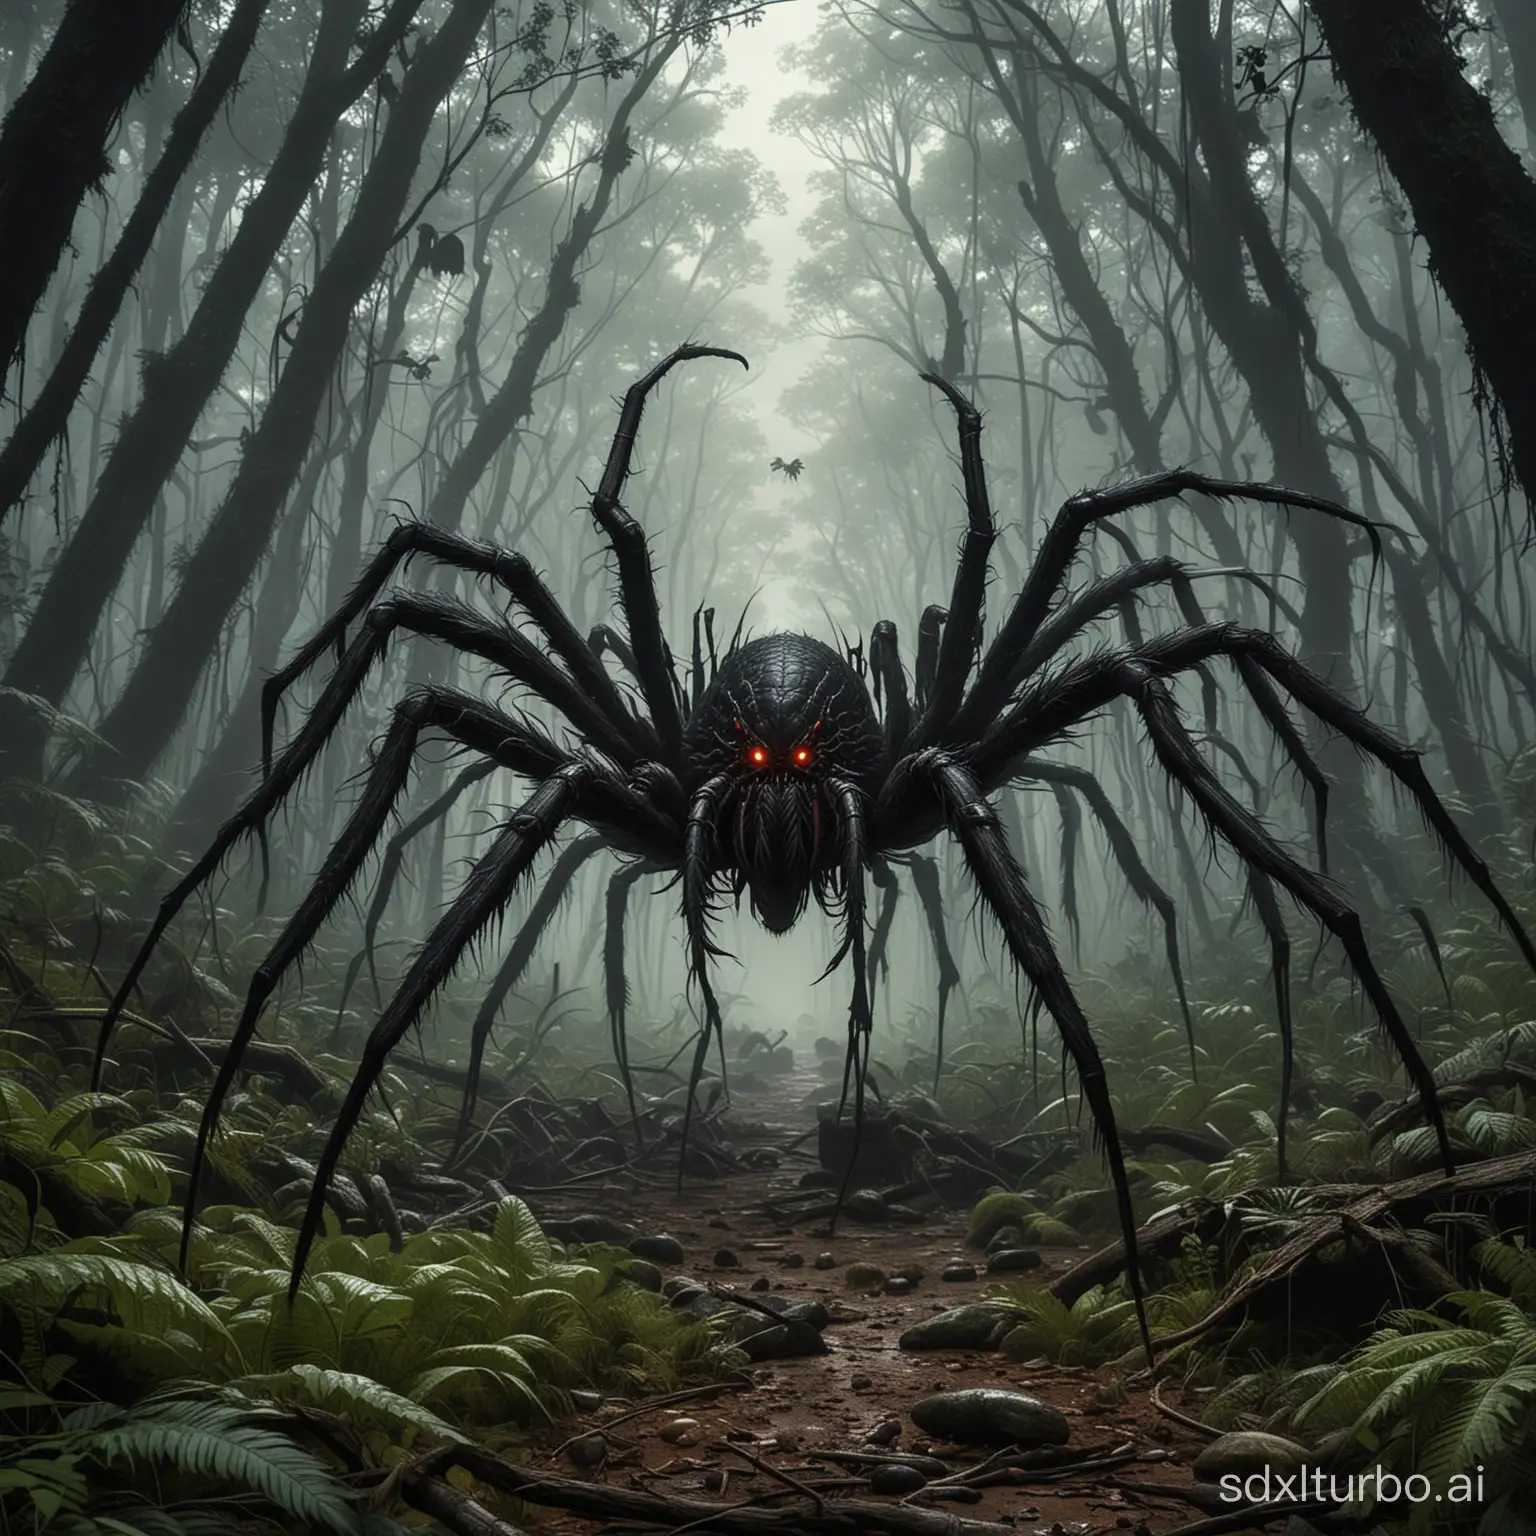 Imagine a nightmarish scene where a horde of giant spiders invades a dense and dark forest. The monstrous arachnids, as big as carts and covered in shiny black hair, creep stealthily among the immense trees, their eight clawed legs crushing